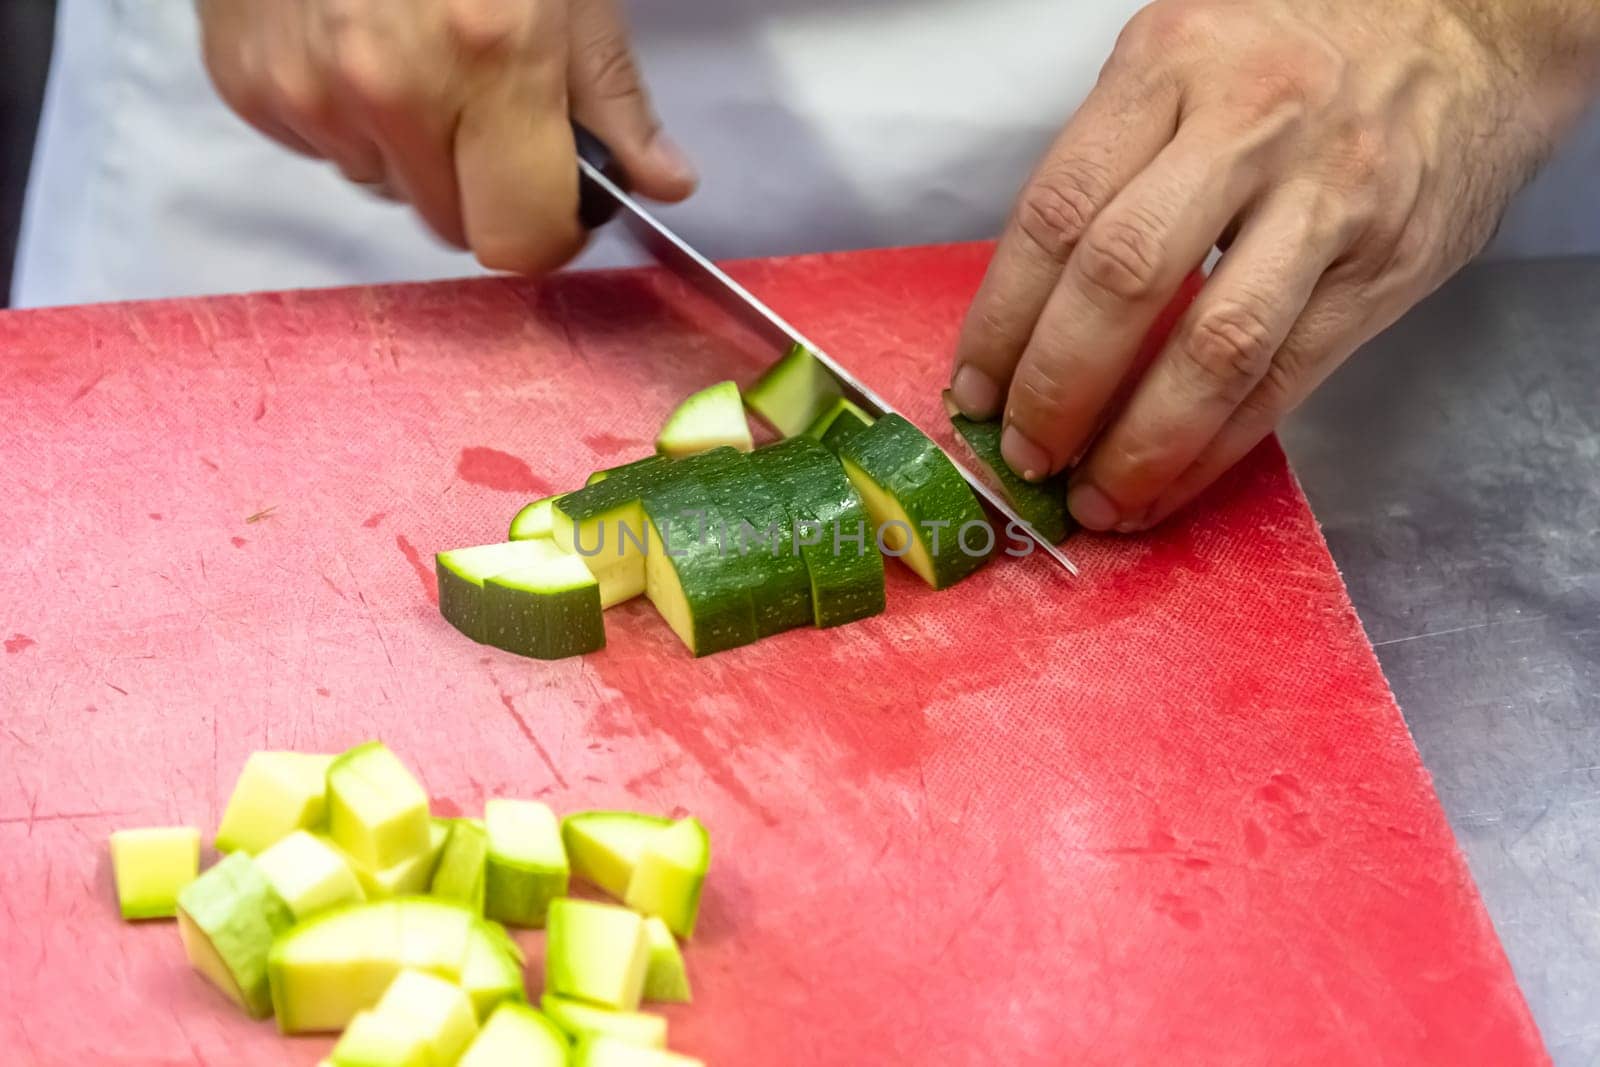 Zucchini being sliced on a red cutting board by Milanchikov